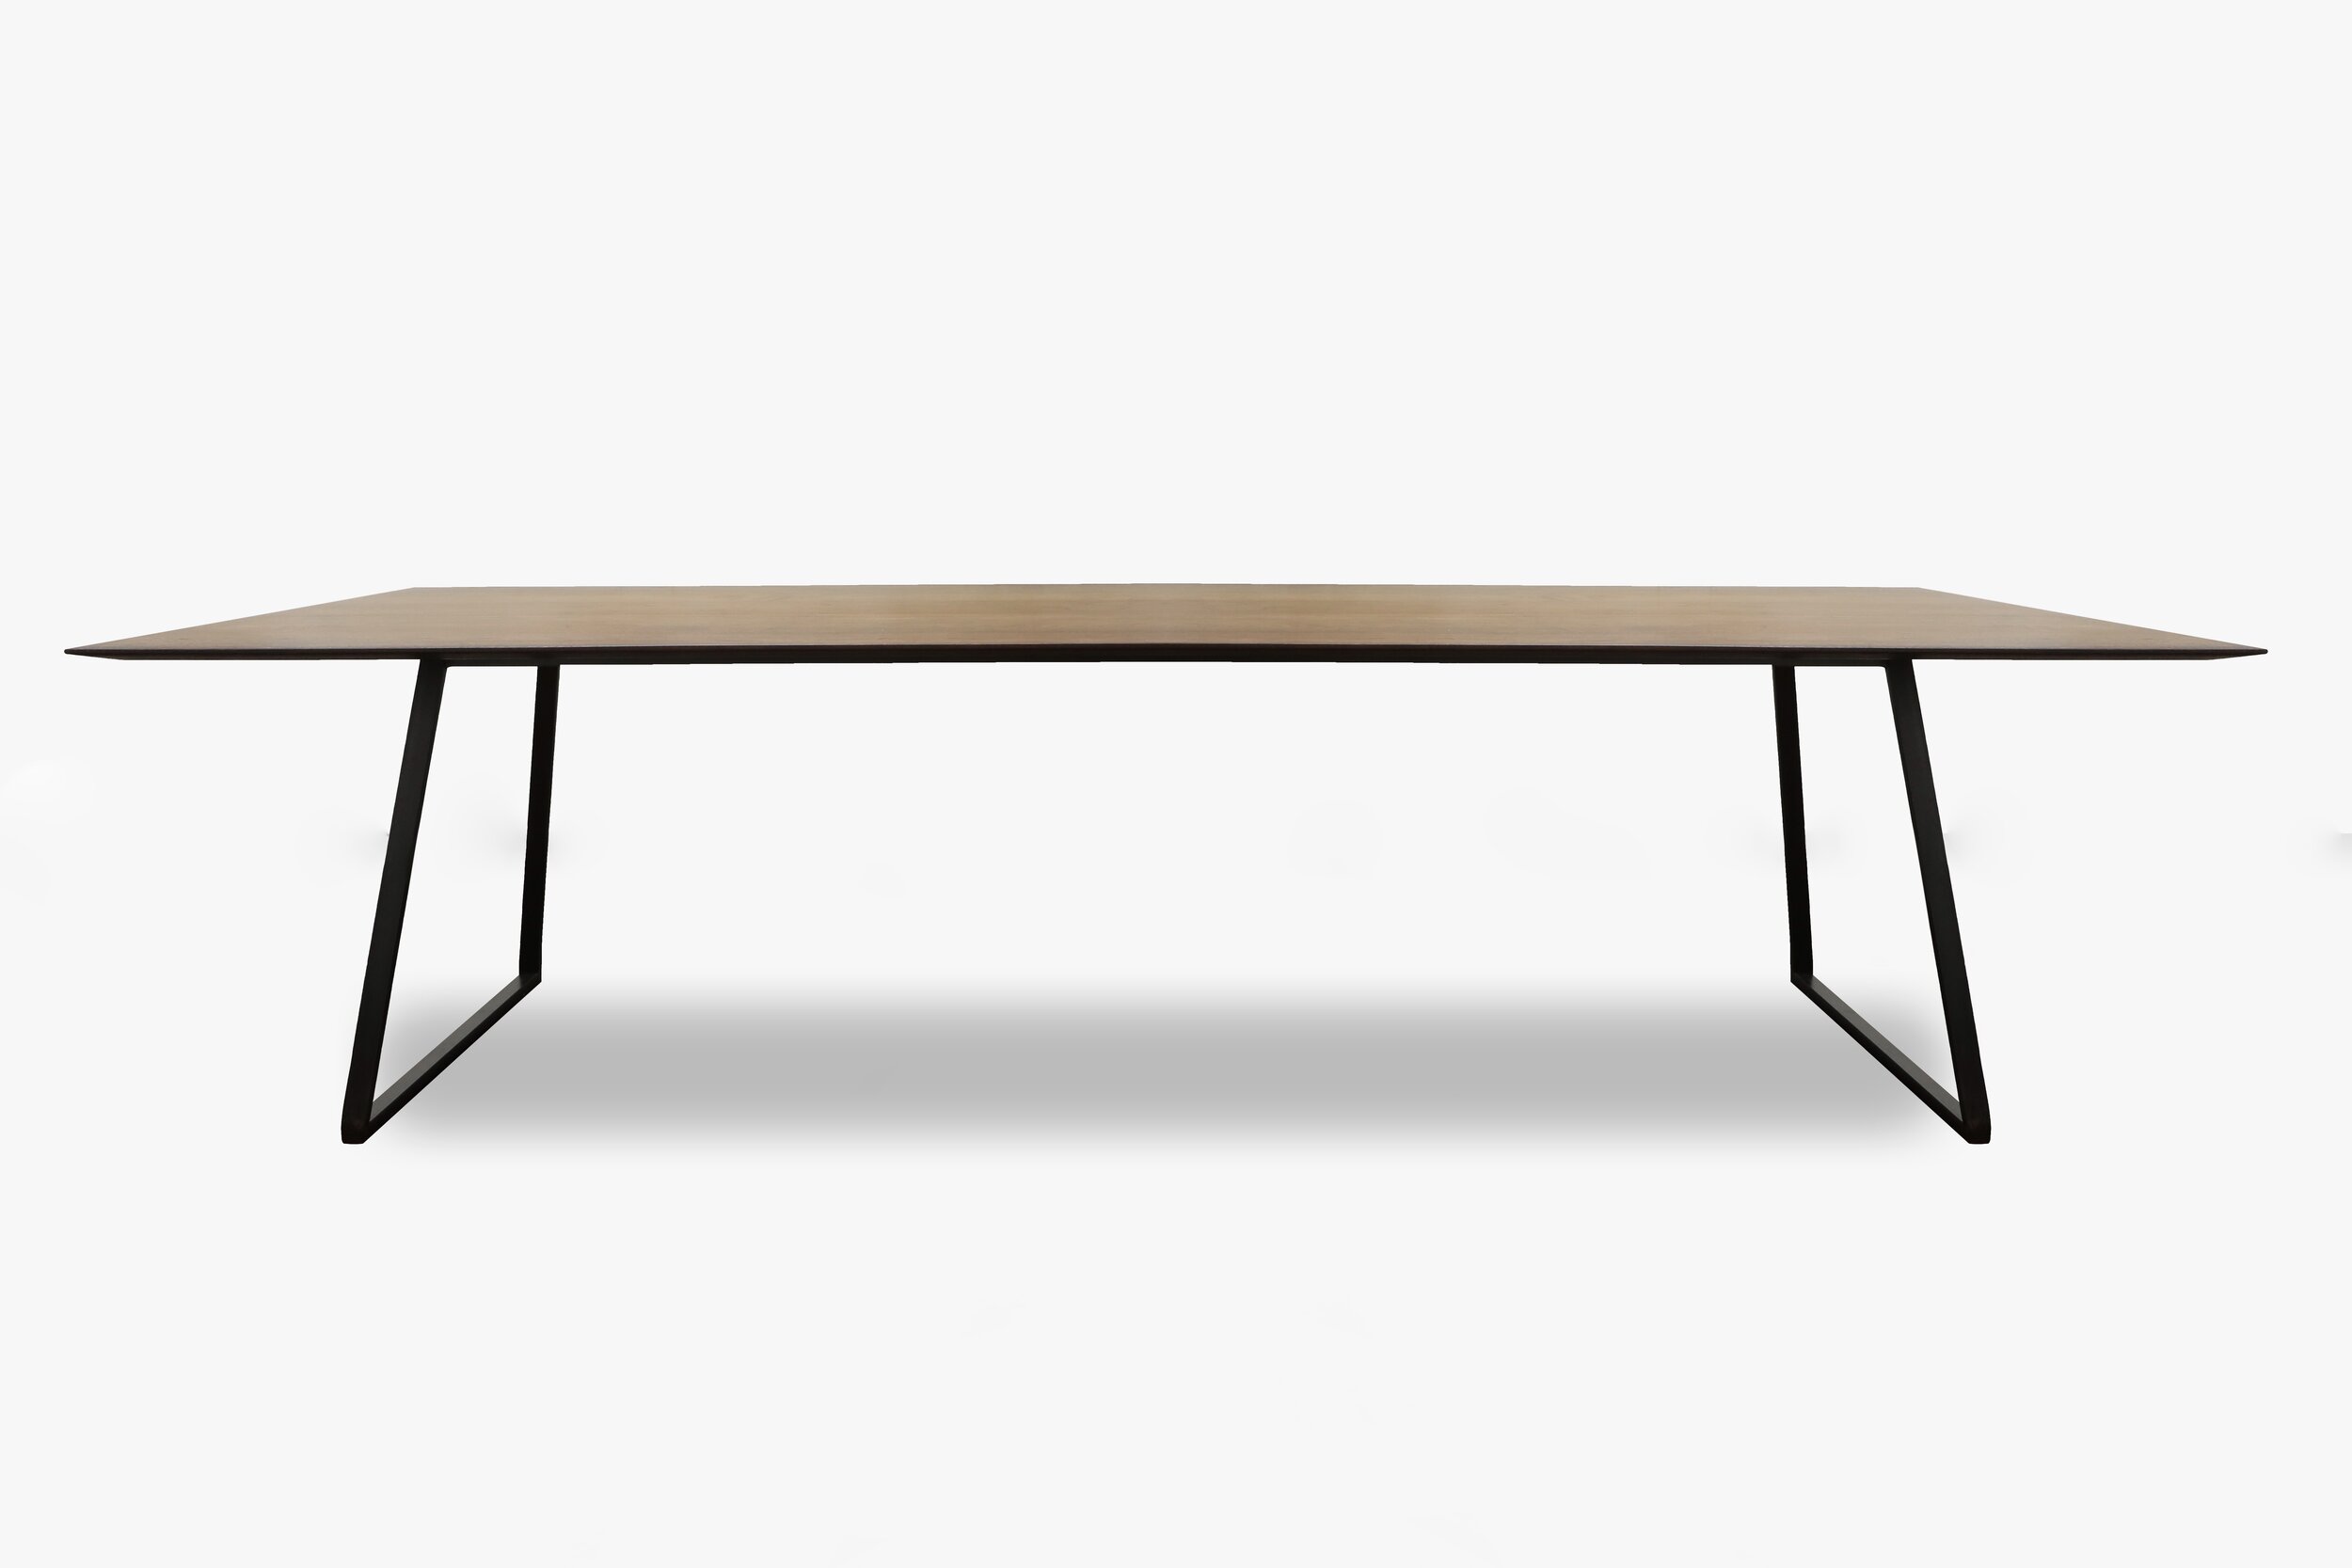   Eased Edge Solid Black Walnut Dining Table with Steel Base 30"h x 48"w x 120" - custom sizes available  